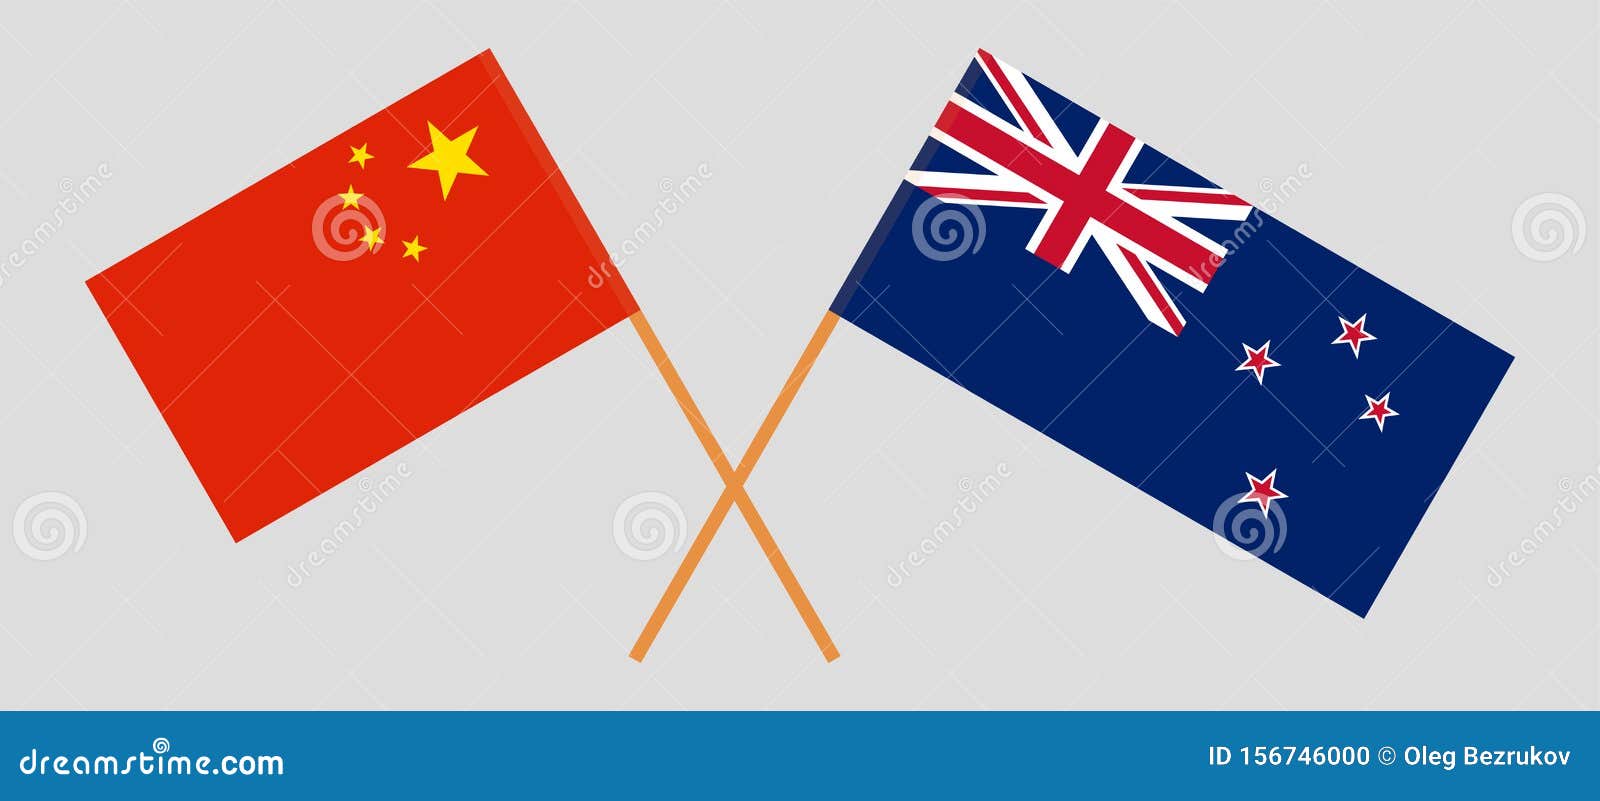 Crossed New Zealand and Chinese Flags Stock photo